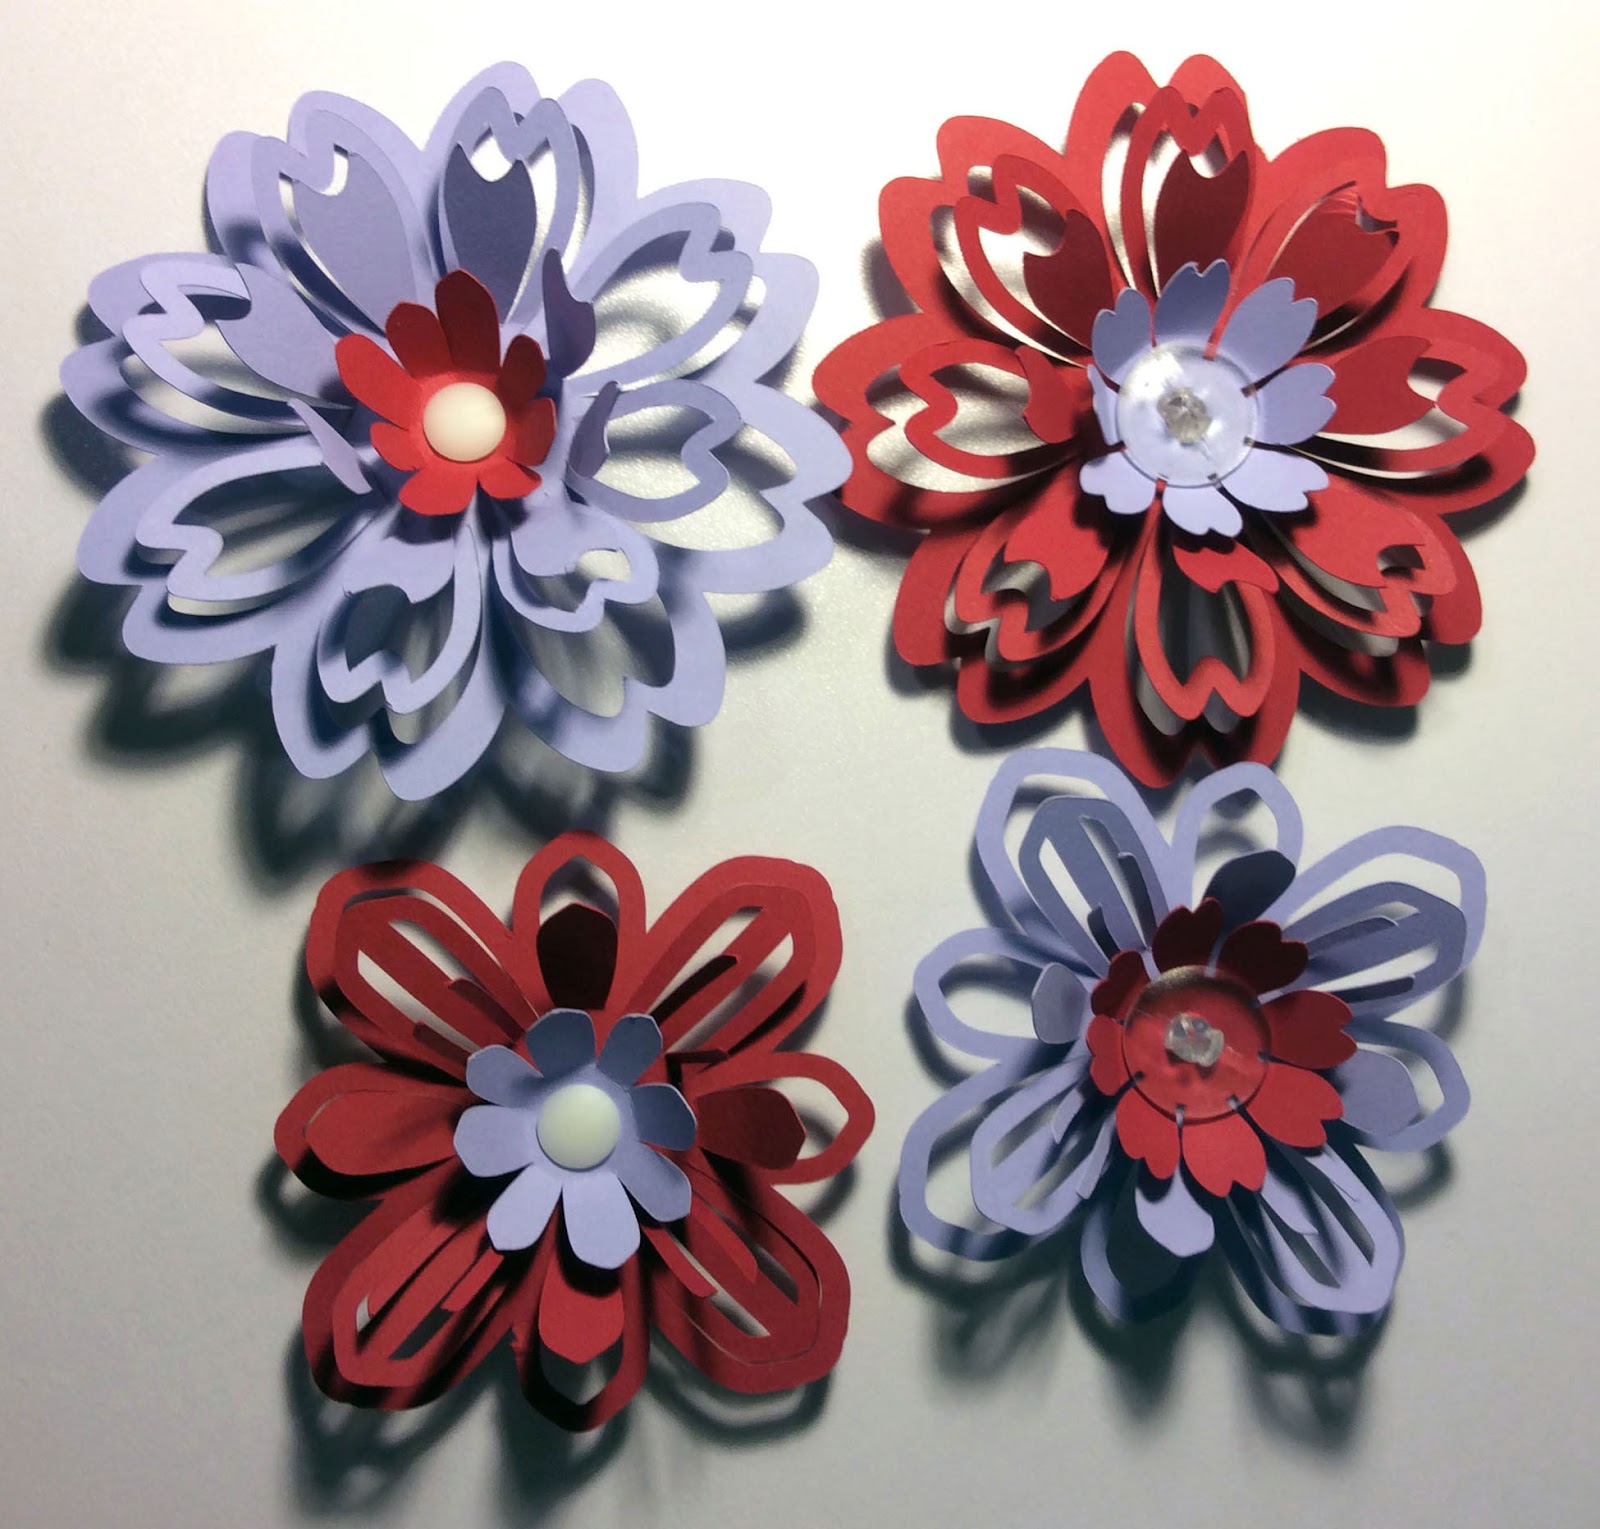 Flowers made with Ratchet Rivets